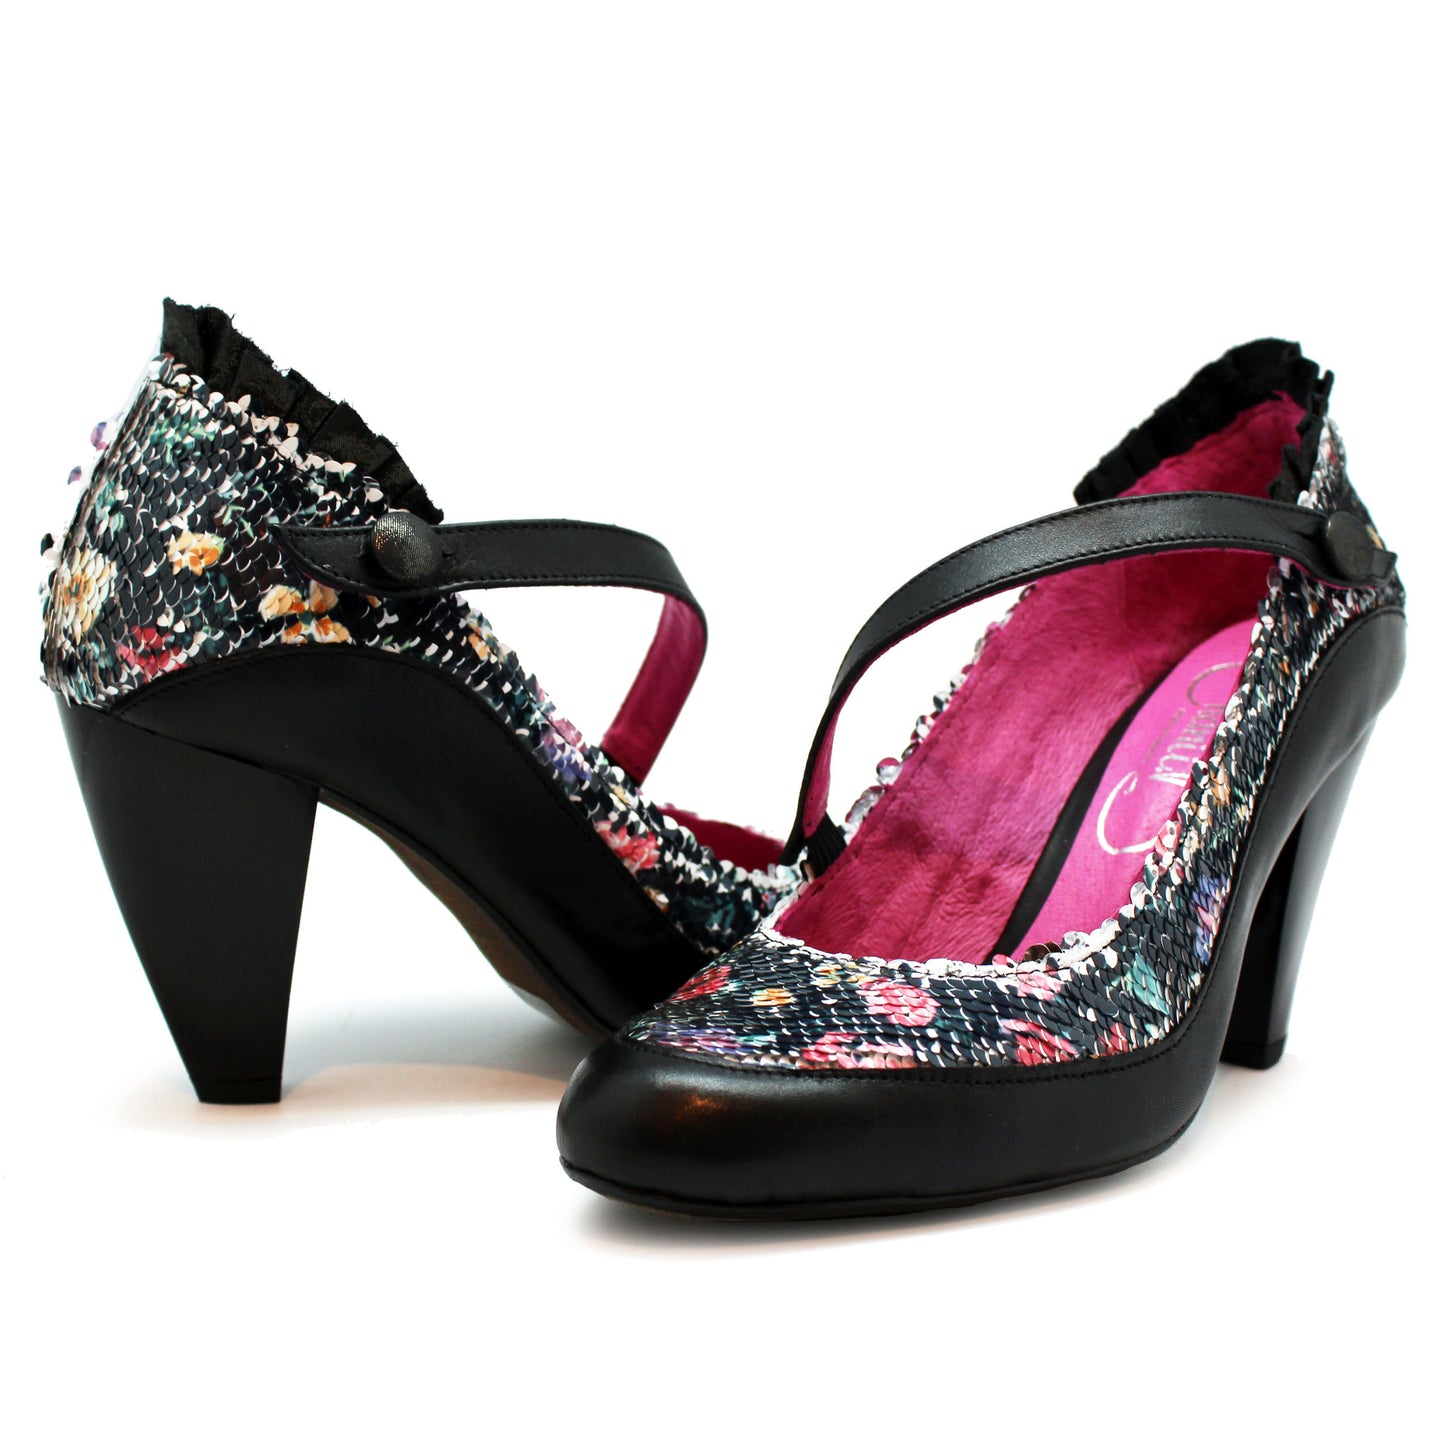 Delicieux - Black/Multi Sequin- last pairs 38 and 40!